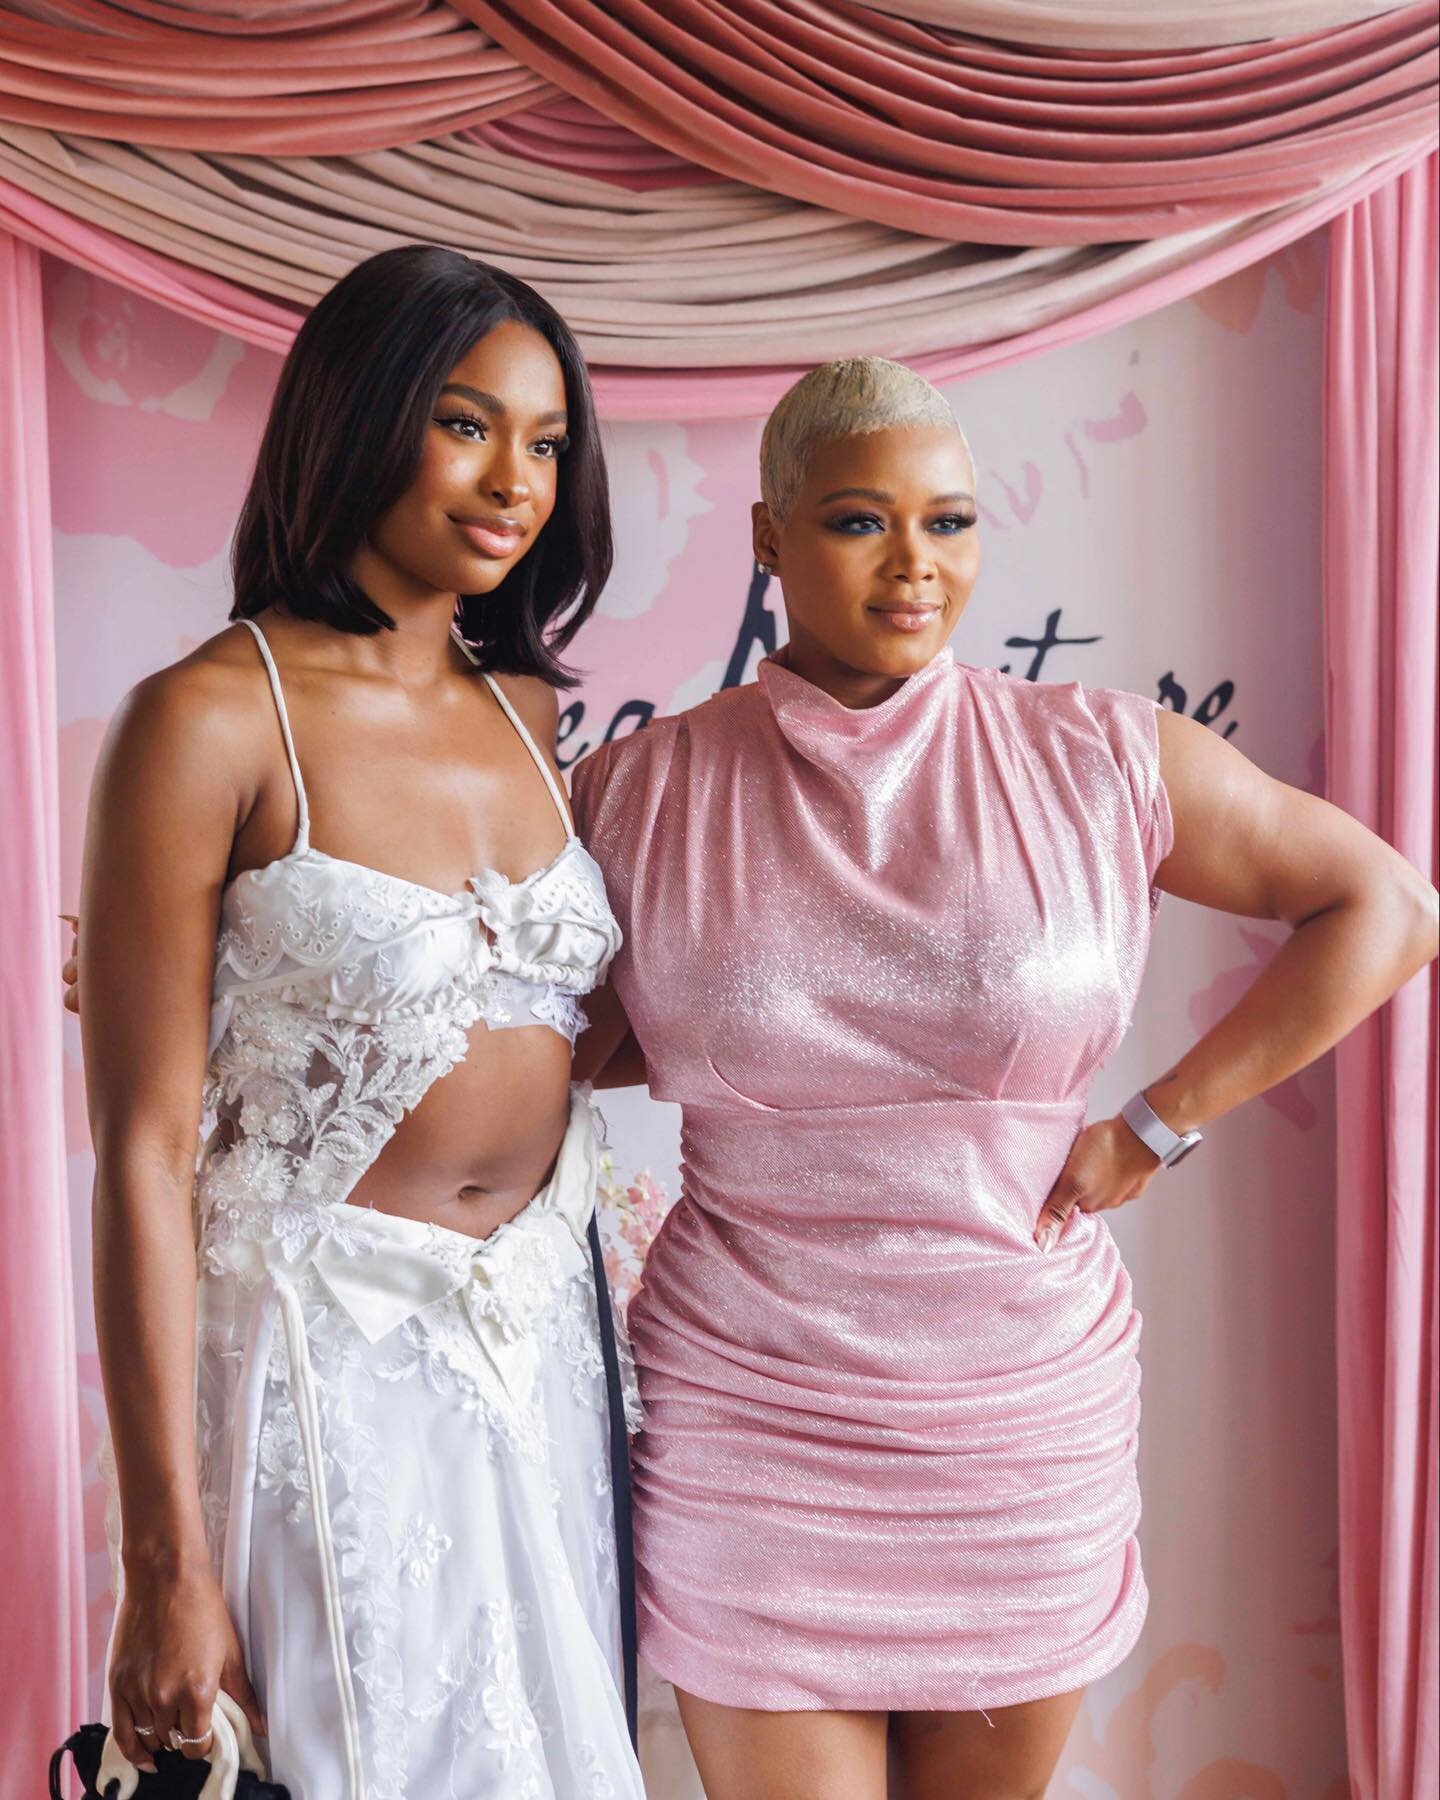 Visit FashionBombDaily.com and TheBombLife.com for recaps of @sheamoisture &lsquo;s #sheadeoforus brunch featuring the beautiful @cocojones ! @sheamoisture &lsquo;s new aluminum free, plant based deodorants come in sumptuous scents with moisturizing,